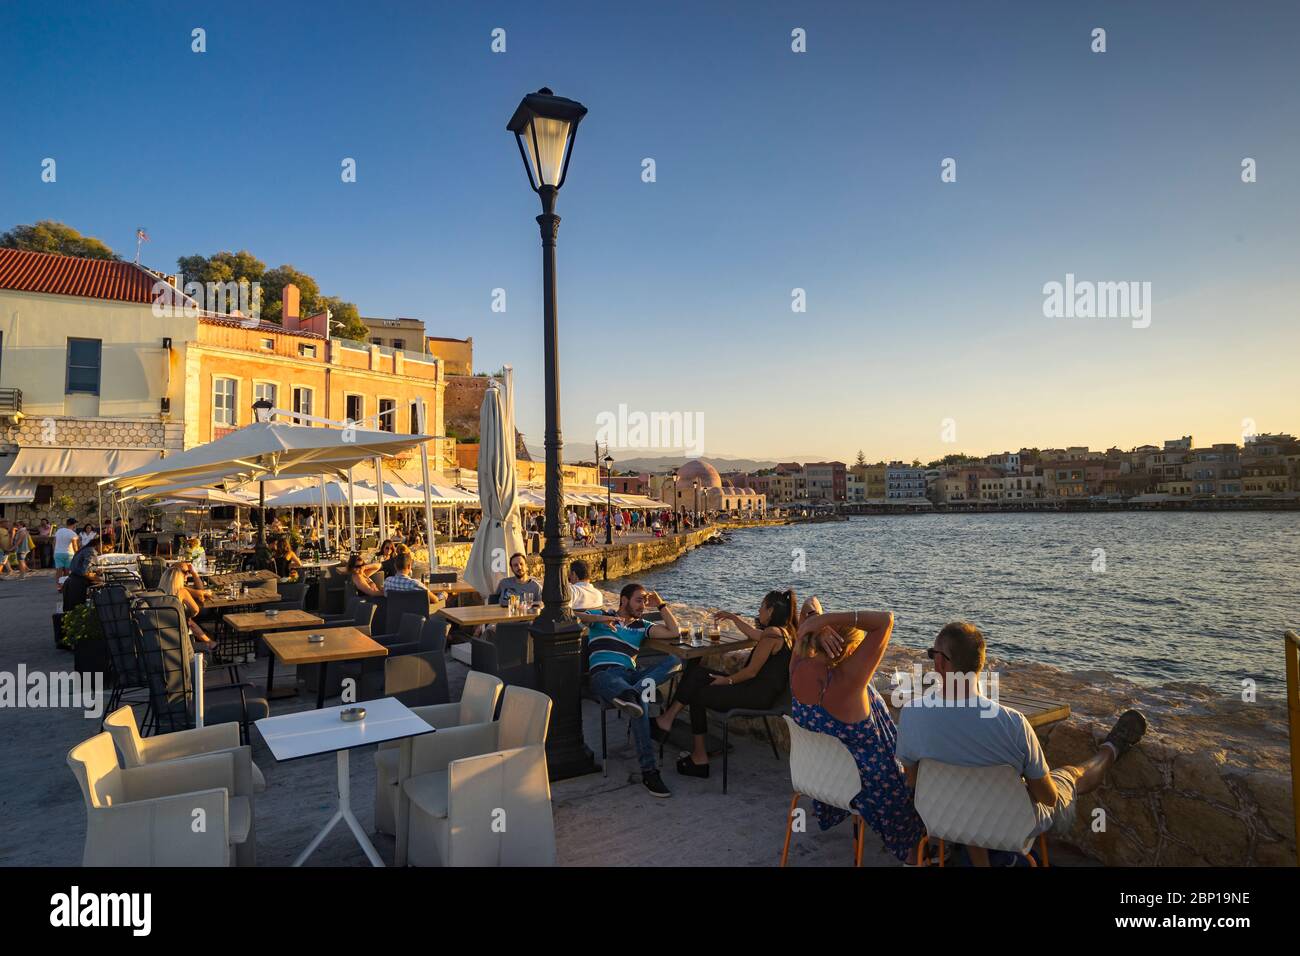 afternoon harbour atmosphere in Chania Stock Photo